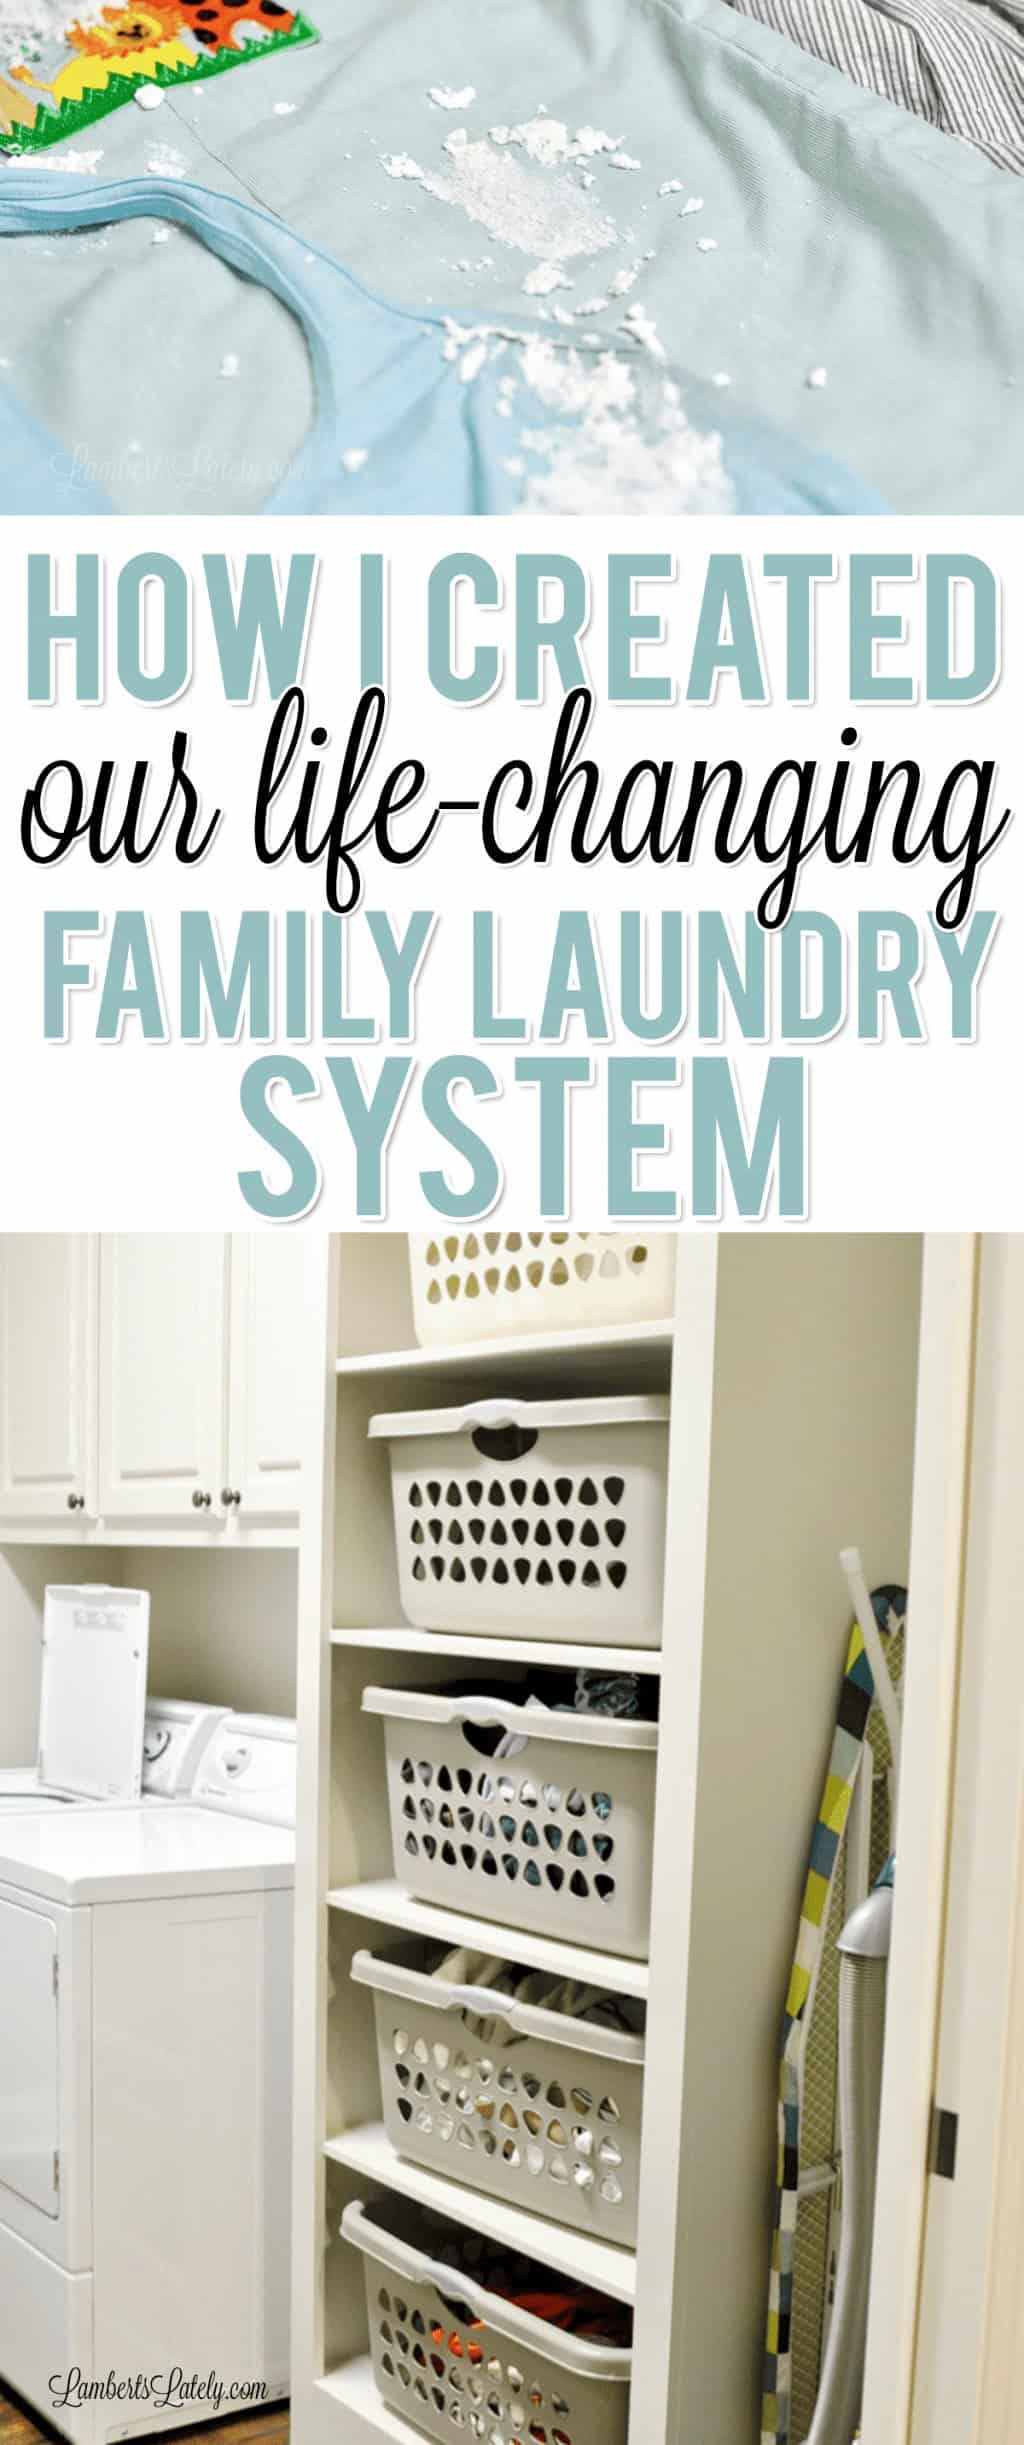 Ready to establish an effective, life-changing laundry system in your home? Get tips and tricks for streamlining the process, with ideas for either small or big families! There are also simple supply and washing machine/dryer recommendations.